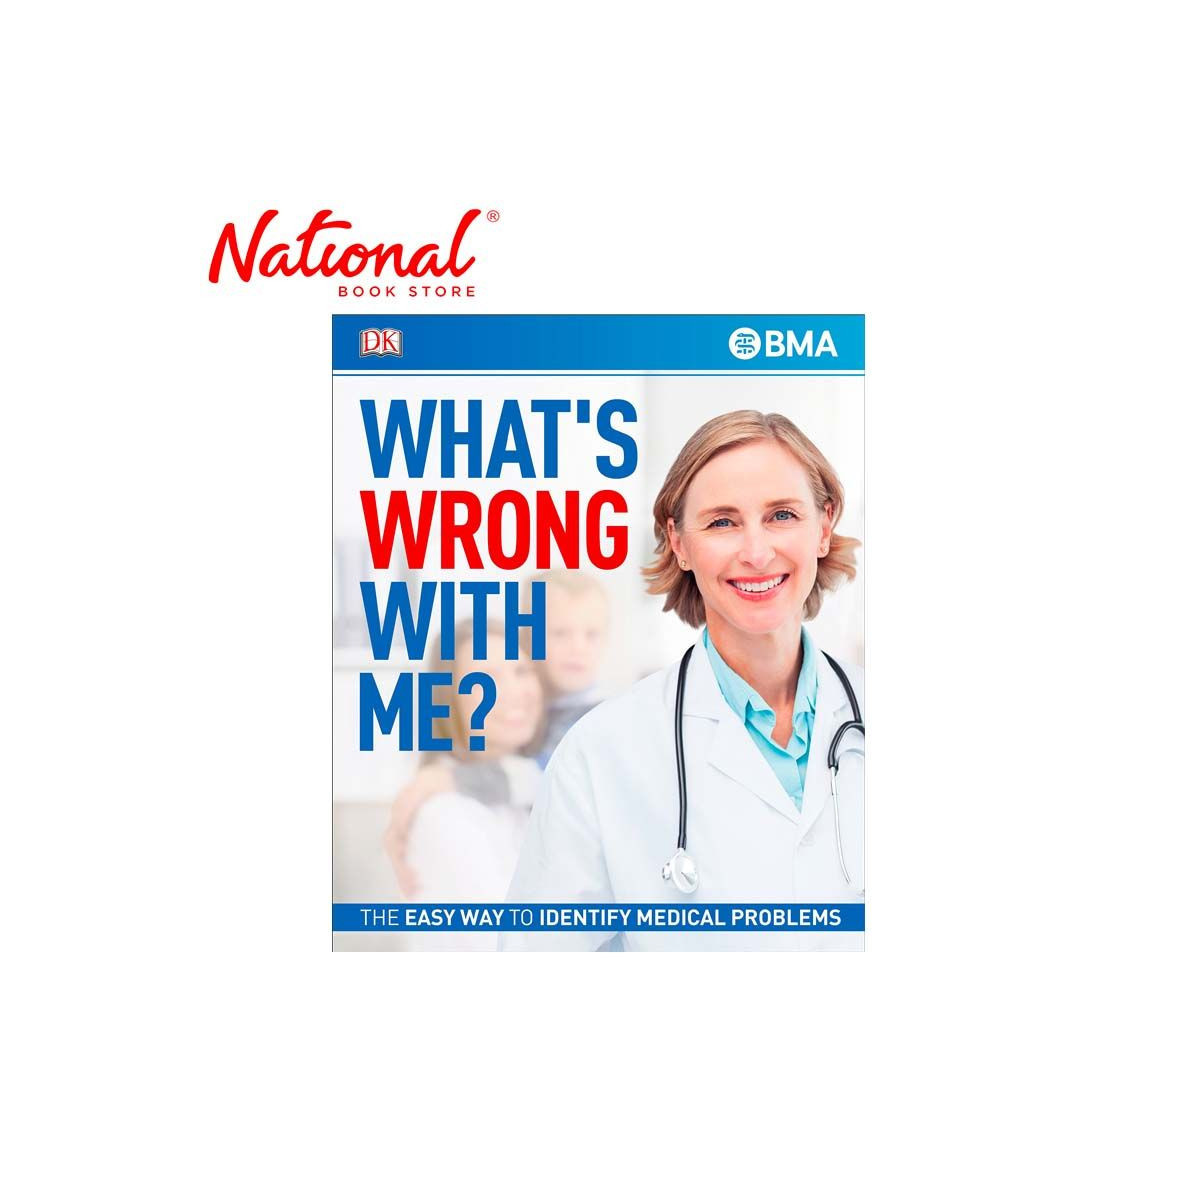 What's Wrong With Me?: The Easy Way to Identify Medical Problems Trade Paperback by DK - Health